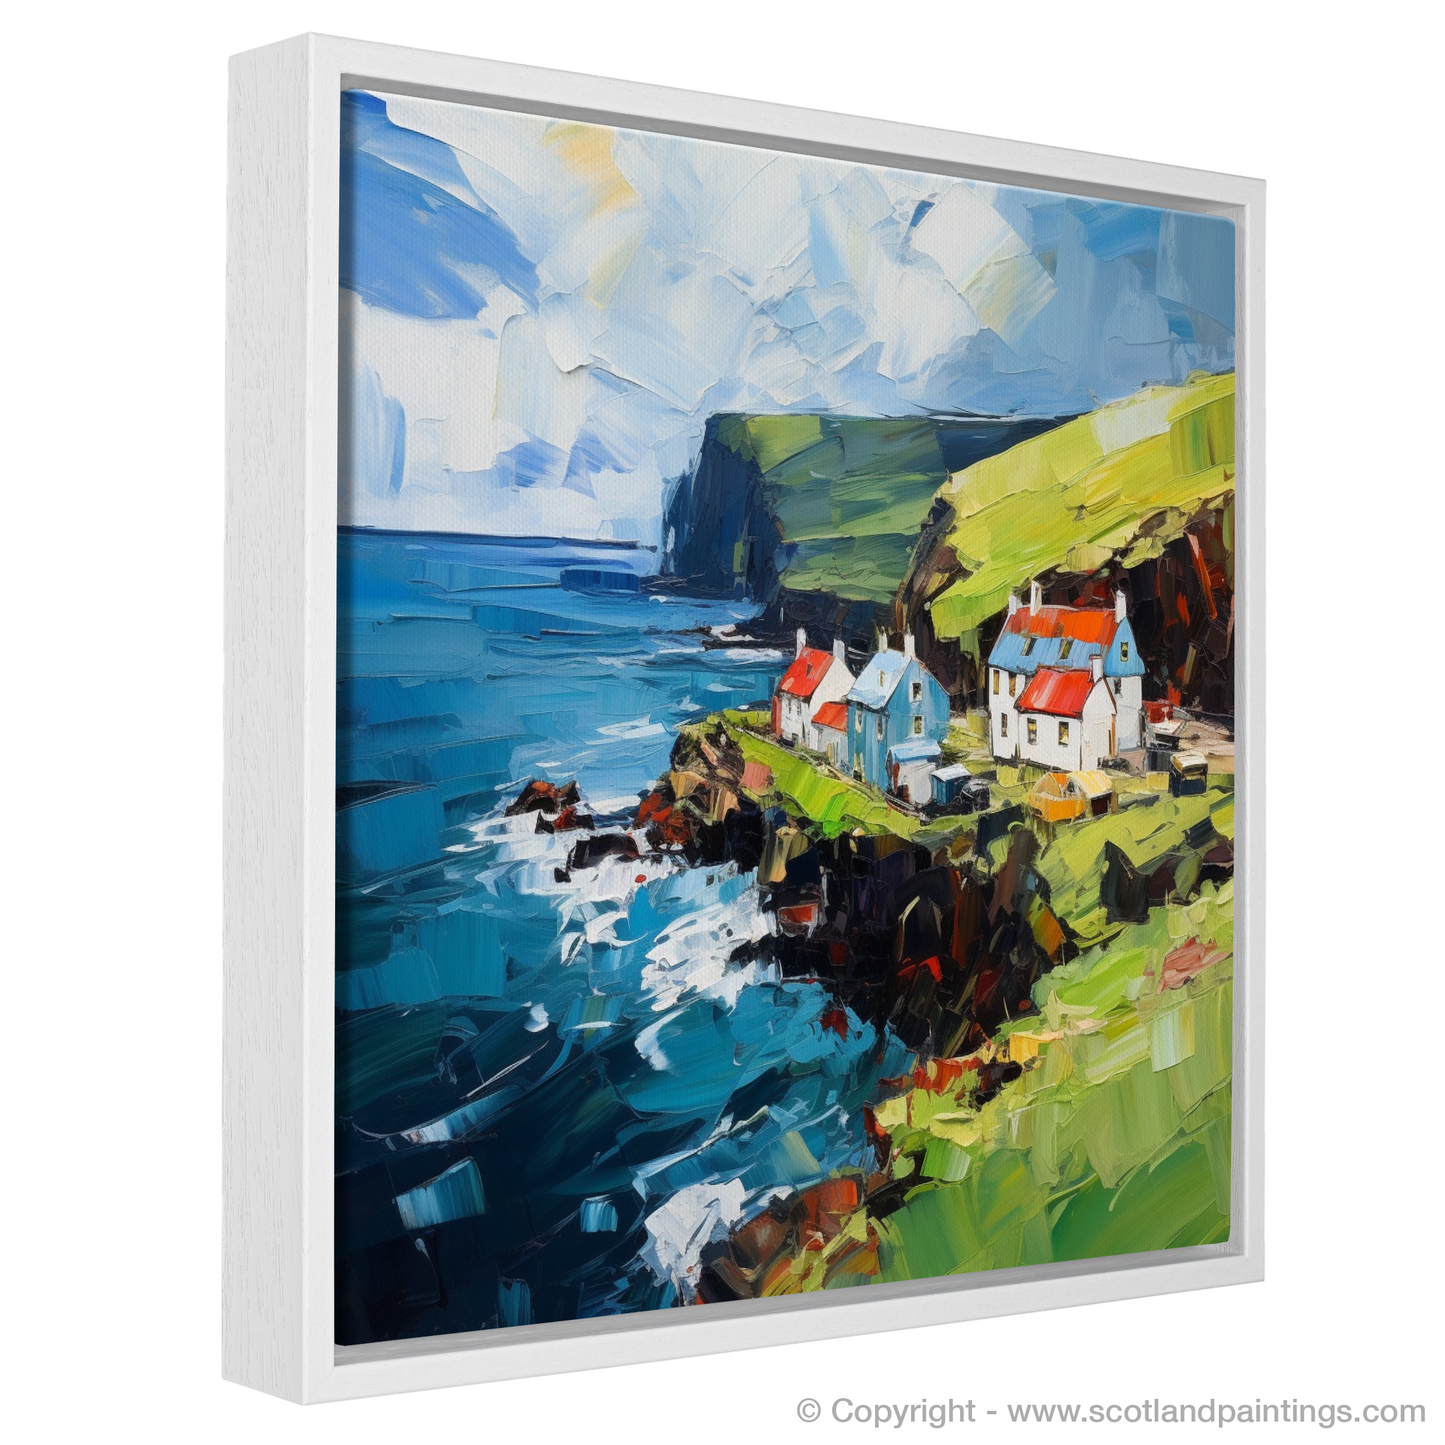 Painting and Art Print of Pennan Harbour, Aberdeenshire entitled "Pennan Harbour: A Symphony of Colour and Emotion".